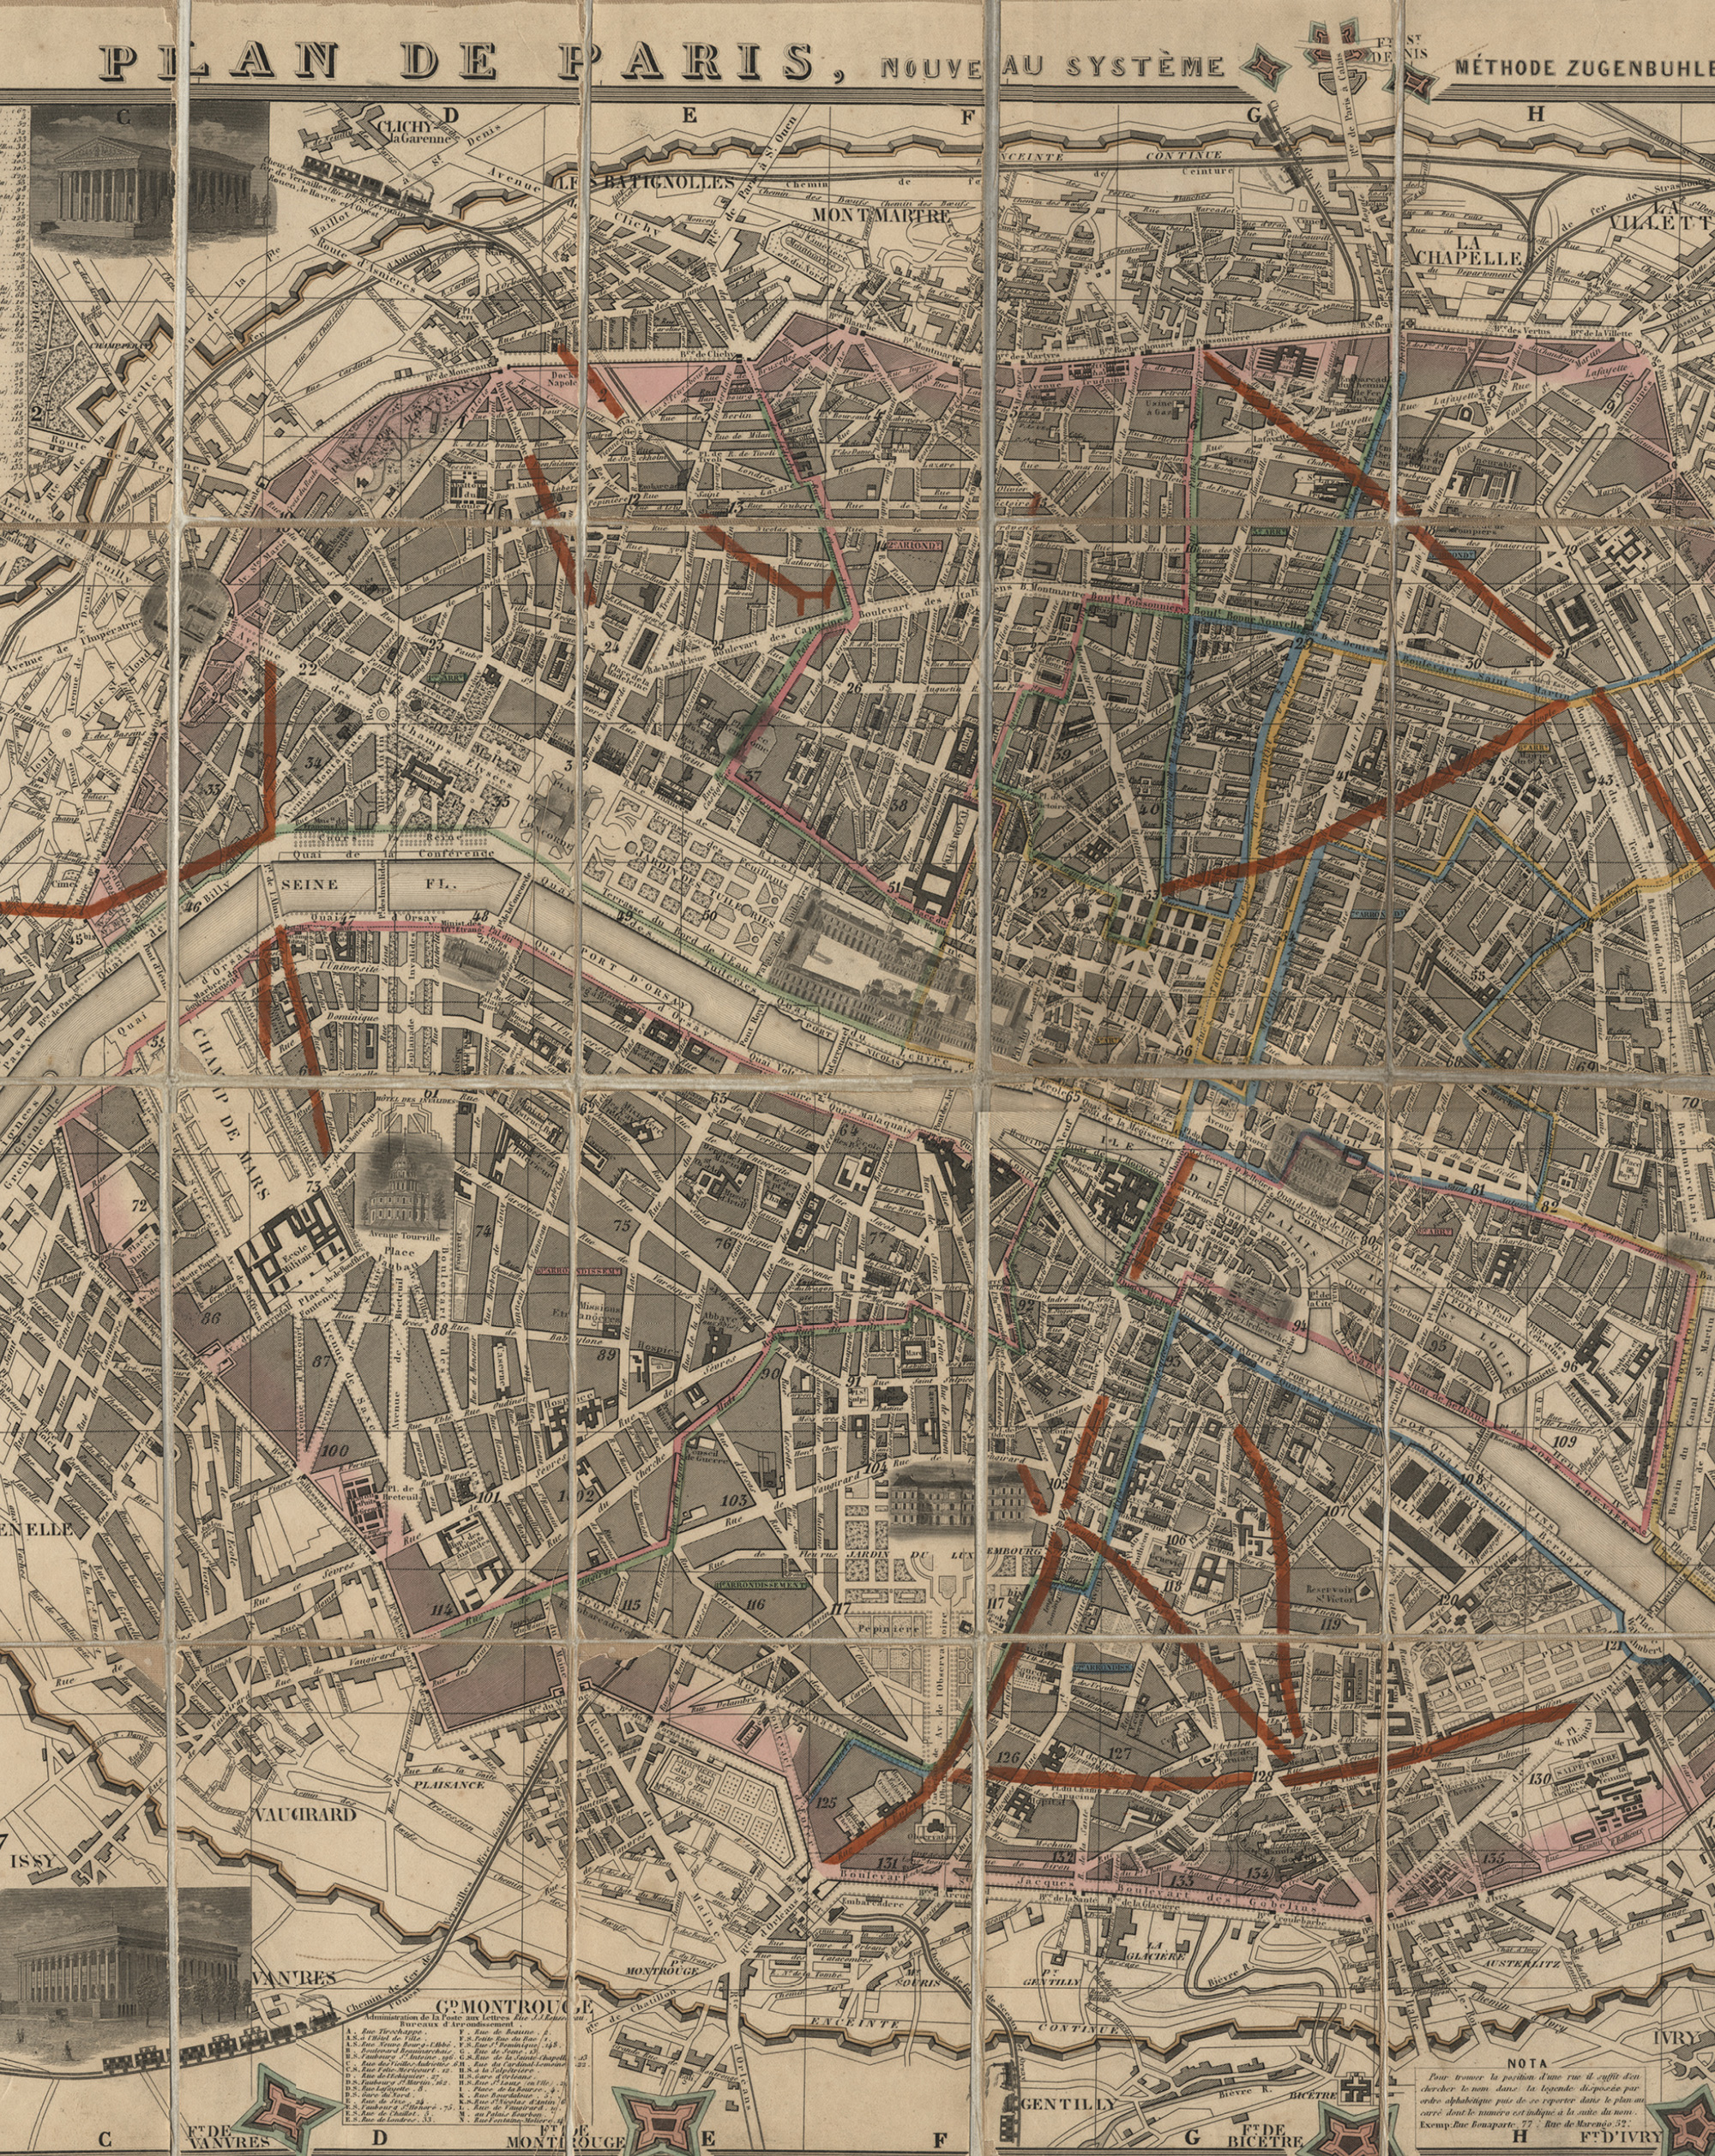 One of a series of nineteenth-century annual maps depicting the projected road construction of Paris. This 1859 map includes the cut for the new rue Monge which would uncover the arènes de Lutèce.